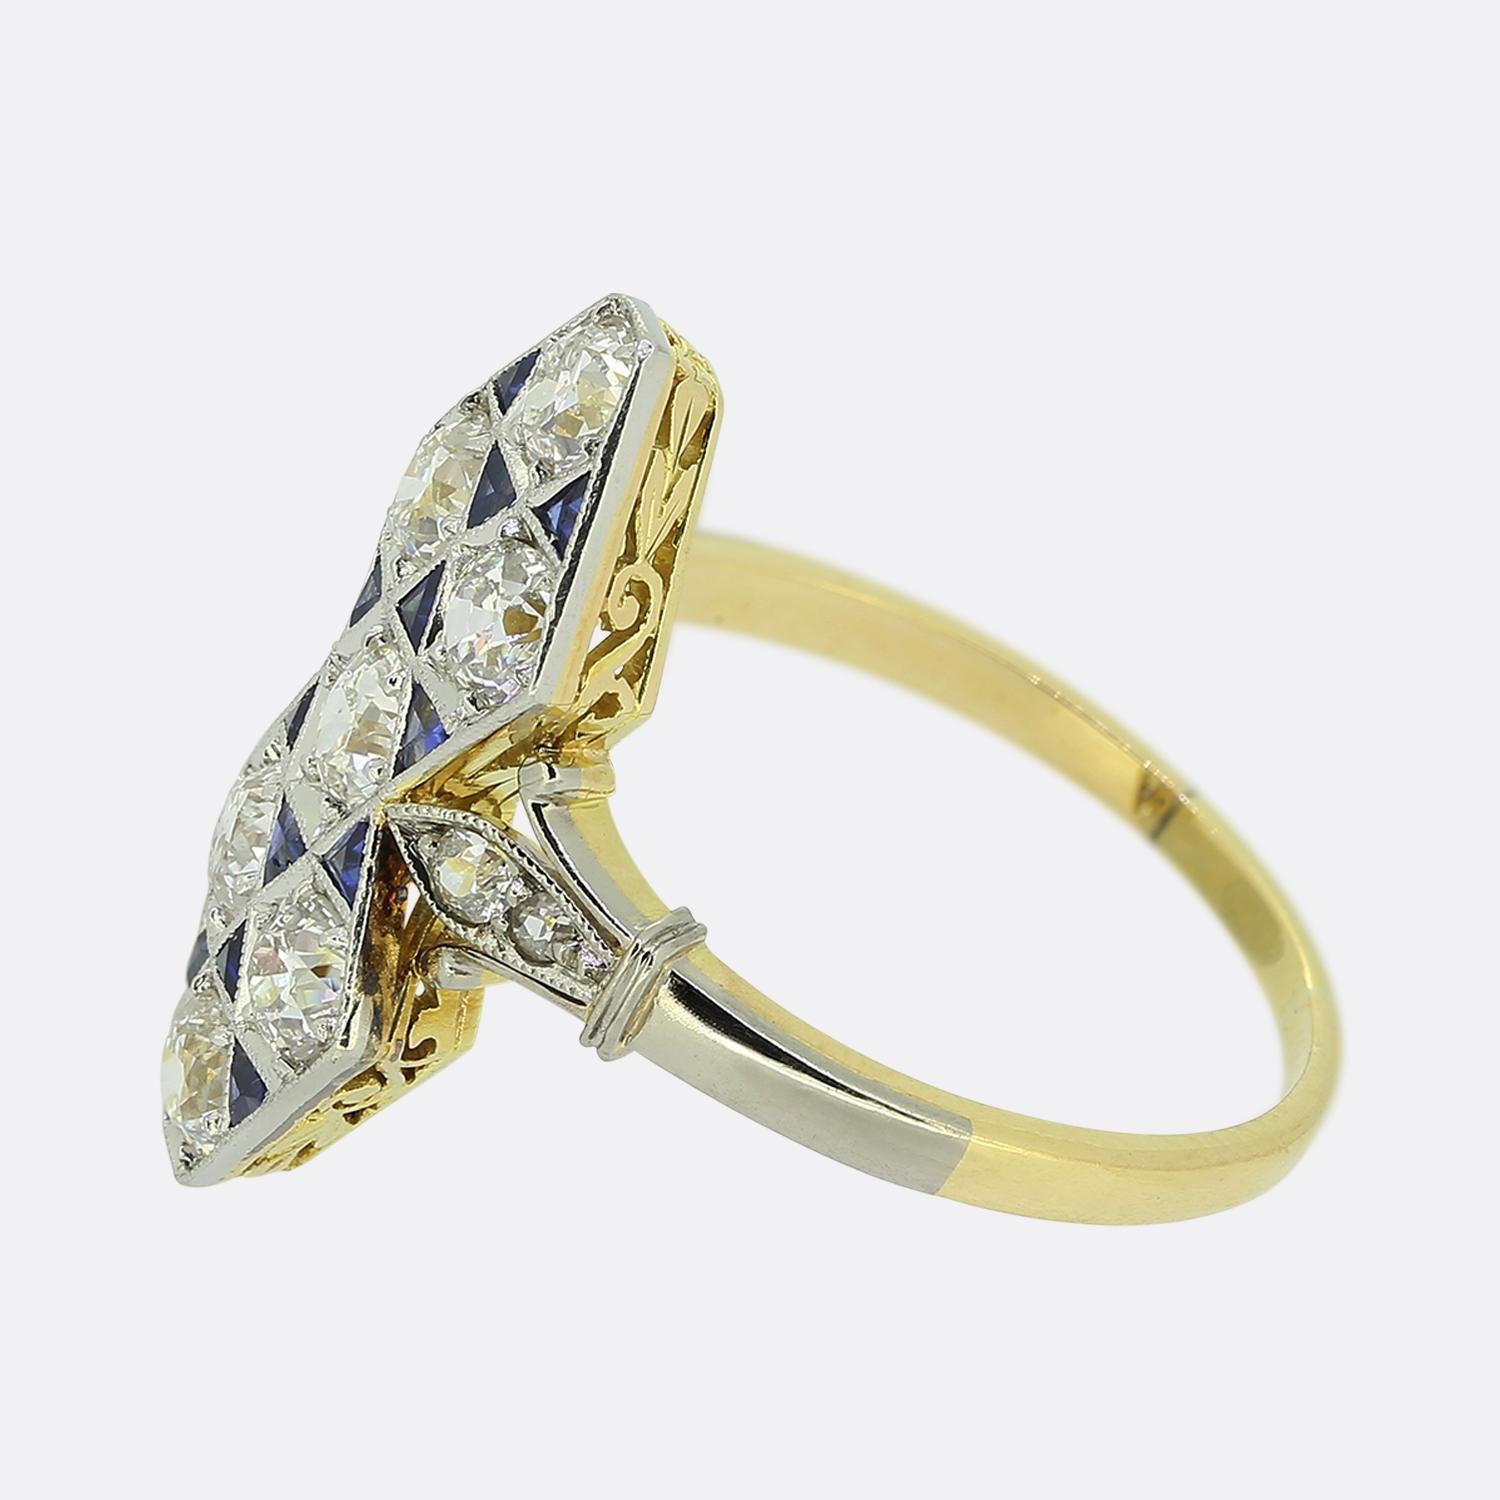 Here we have a marvellous navette ring taken from the pinnacle of the Art Deco movement. This elegant piece showcases a geometric design consisting of seven round faceted old cut diamonds with twelve perfectly matched triangular shaped calibre cut